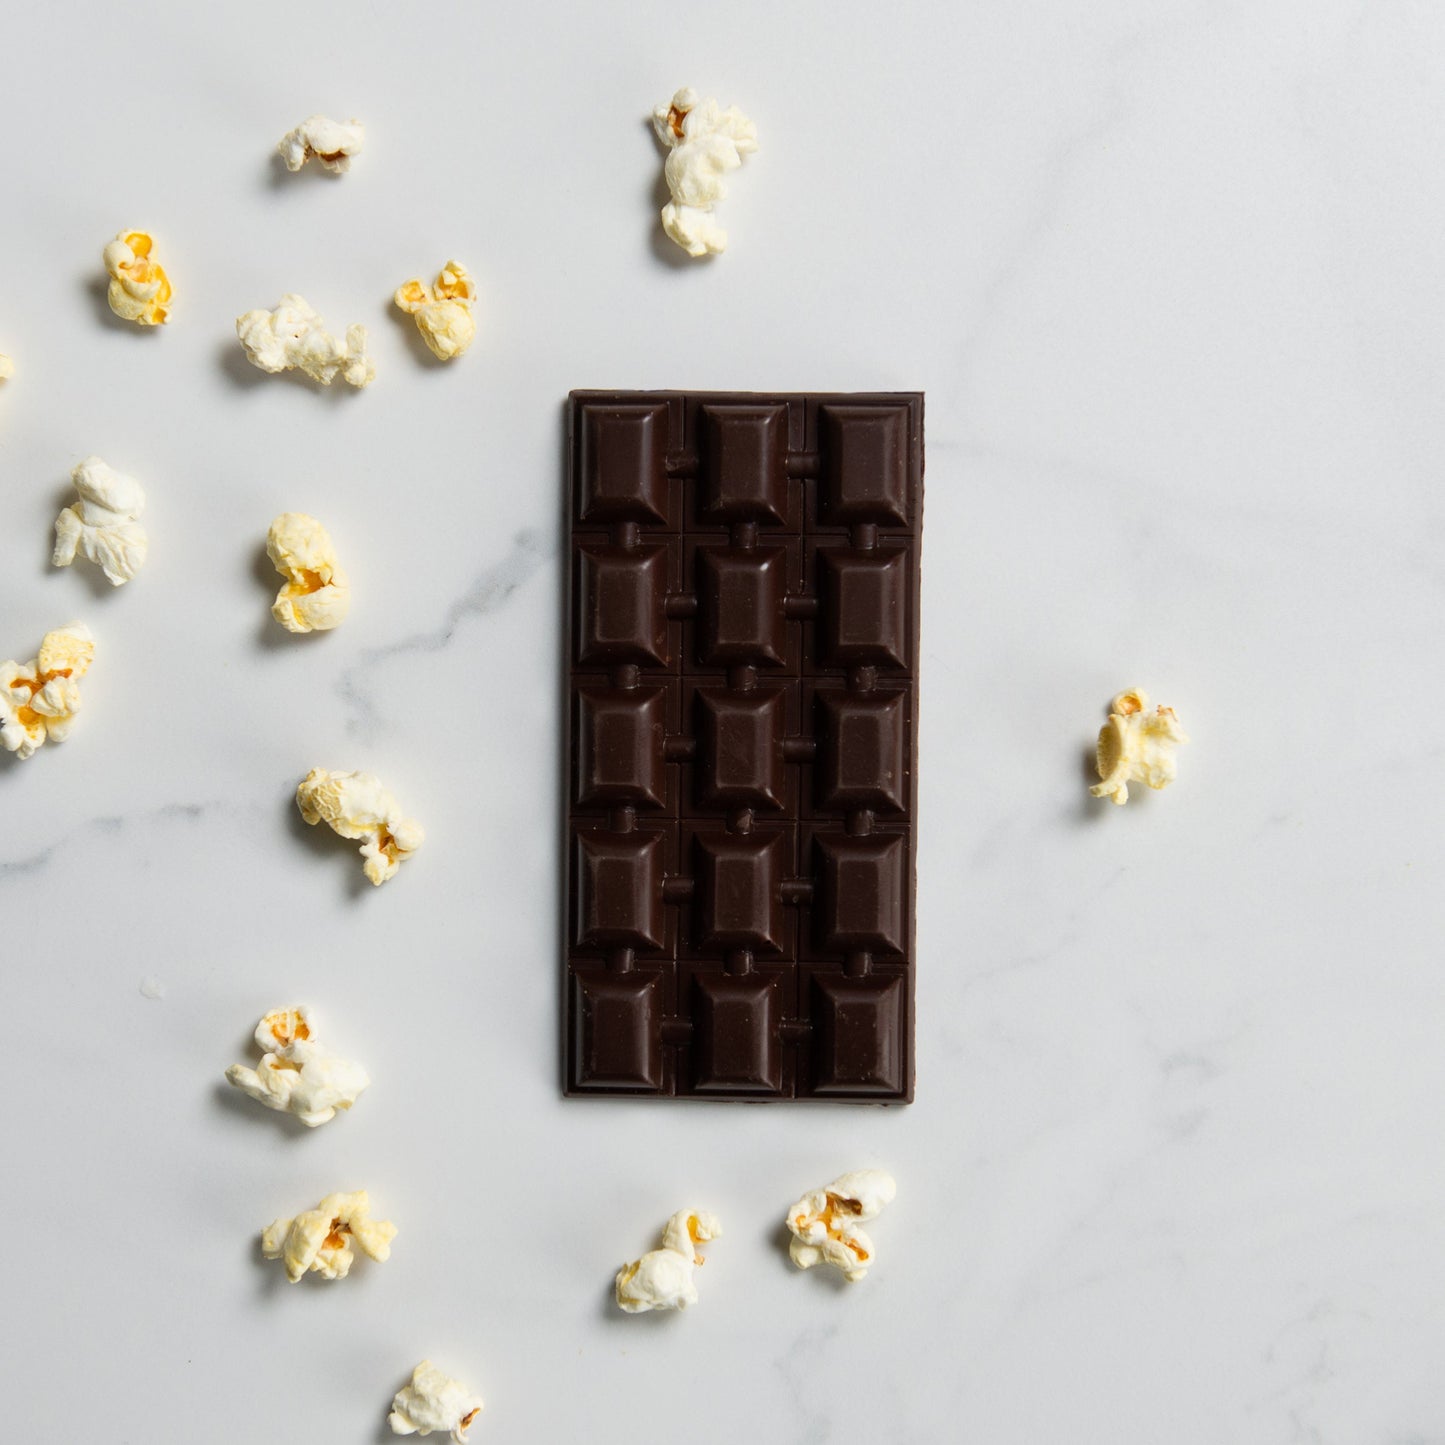 Buttered Popcorn Explosion Chocolate Bar